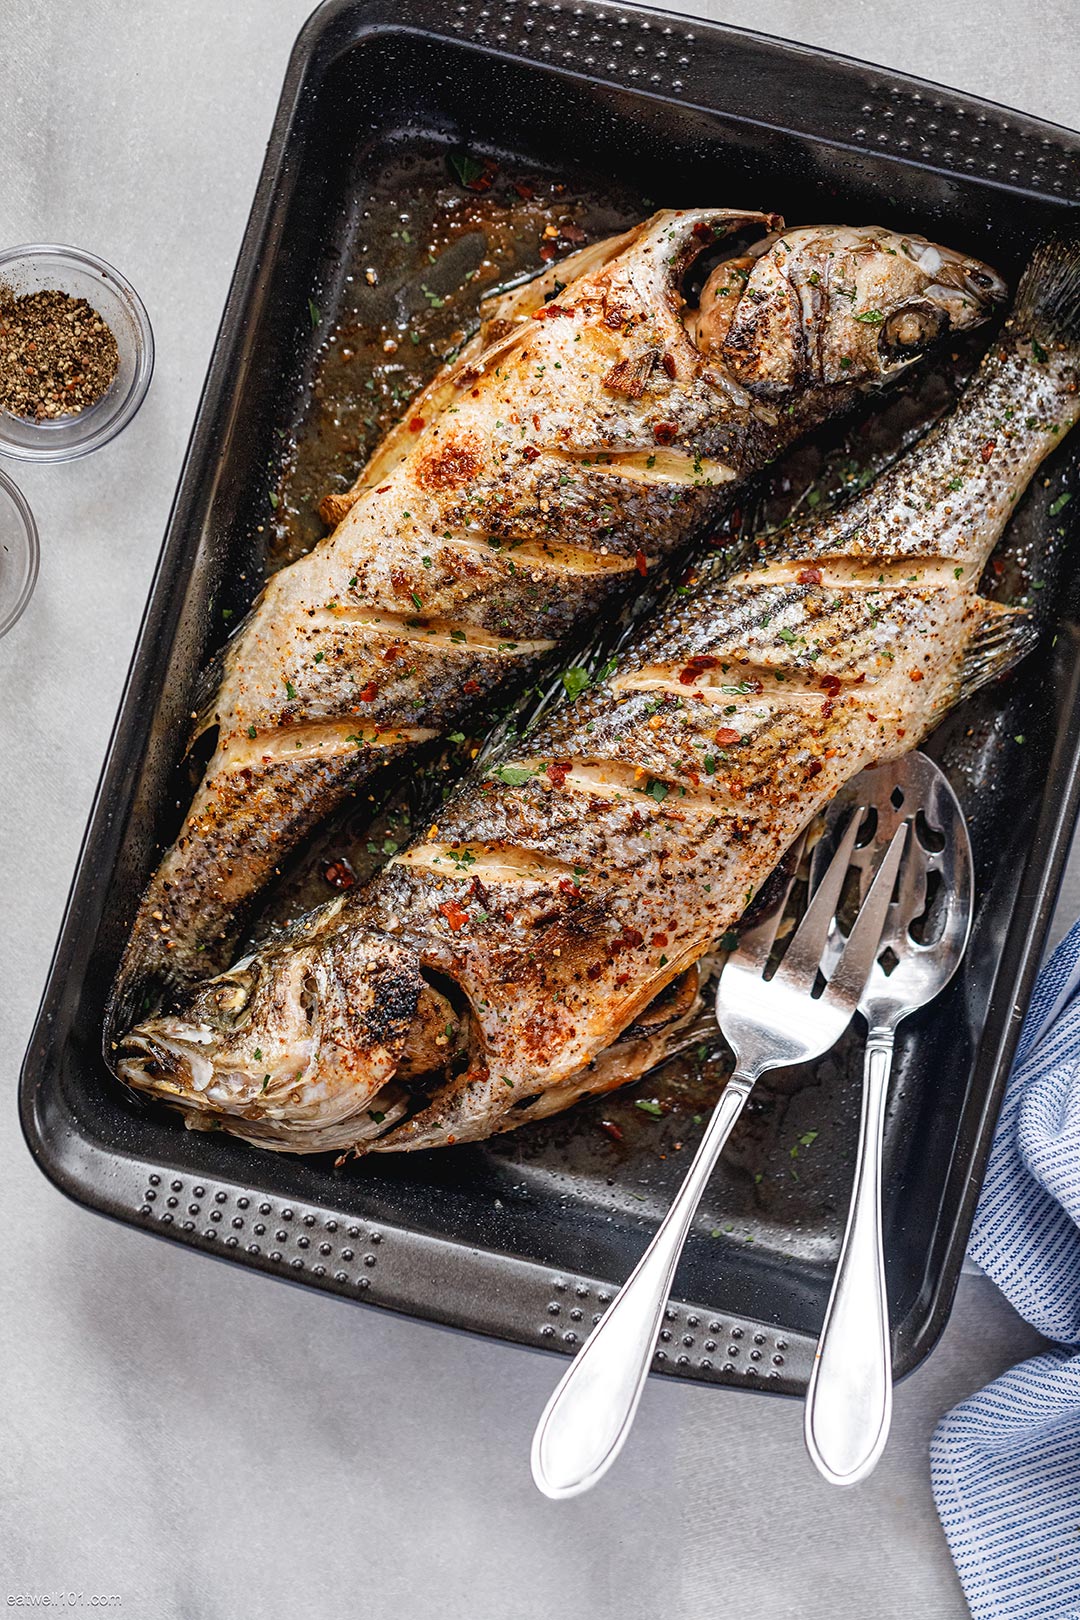 Grilled Sea Bass recipe - #recipe by #eatwell101